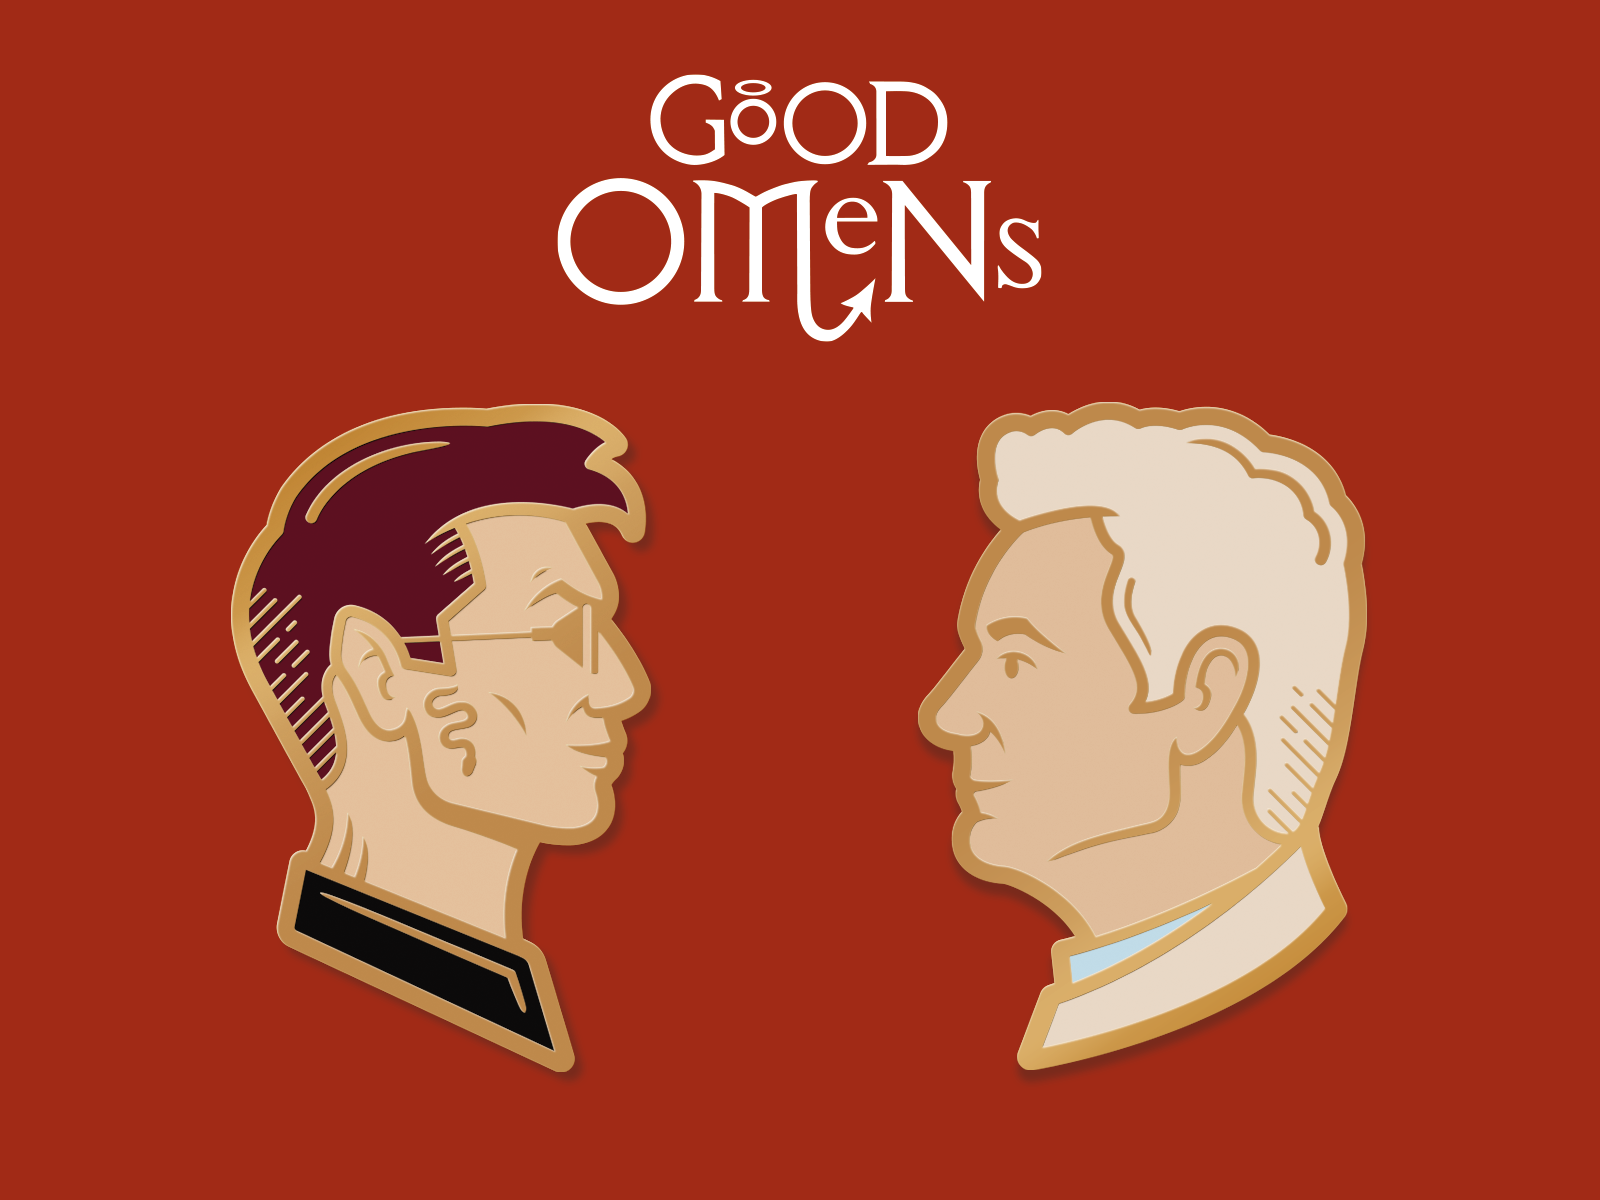 Good Omens Official Enamel Pins 003 004 Crowley And Aziraphale By Carl Sutton On Dribbble 7268